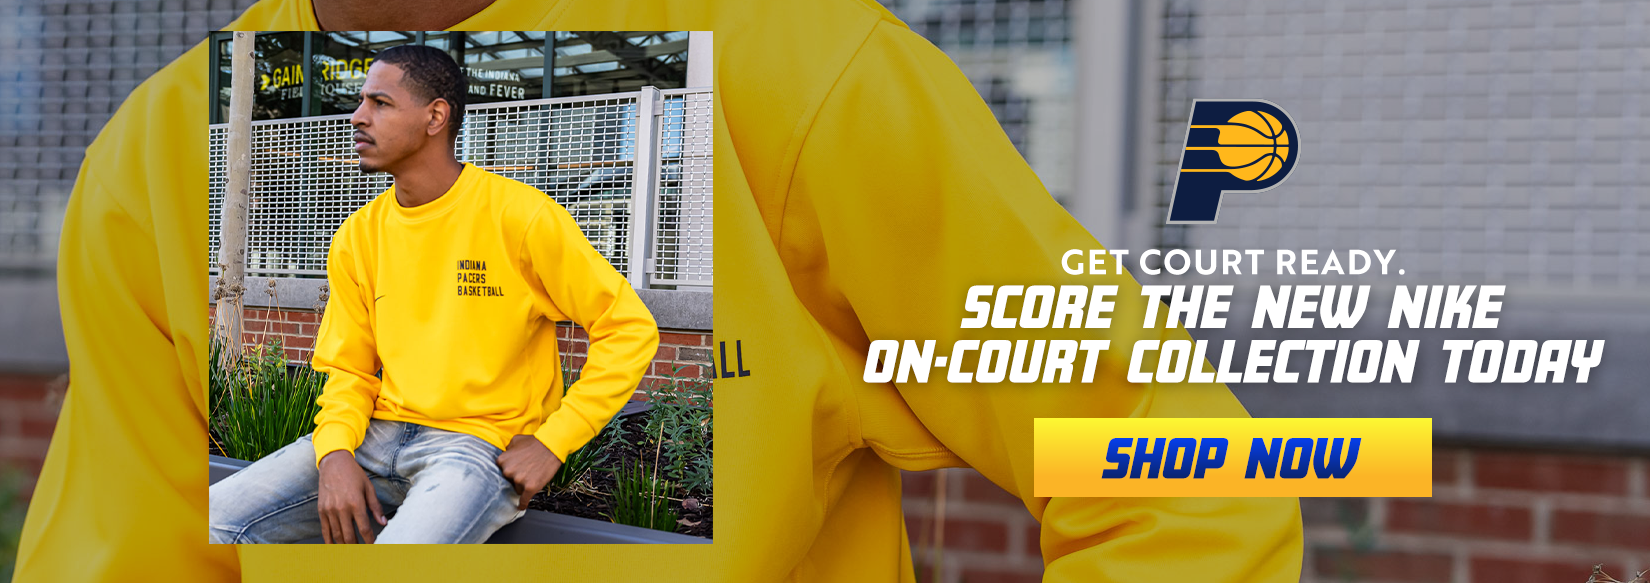 Get Court Ready. Score The New Nike On-Court Collection Today SHOP NOW